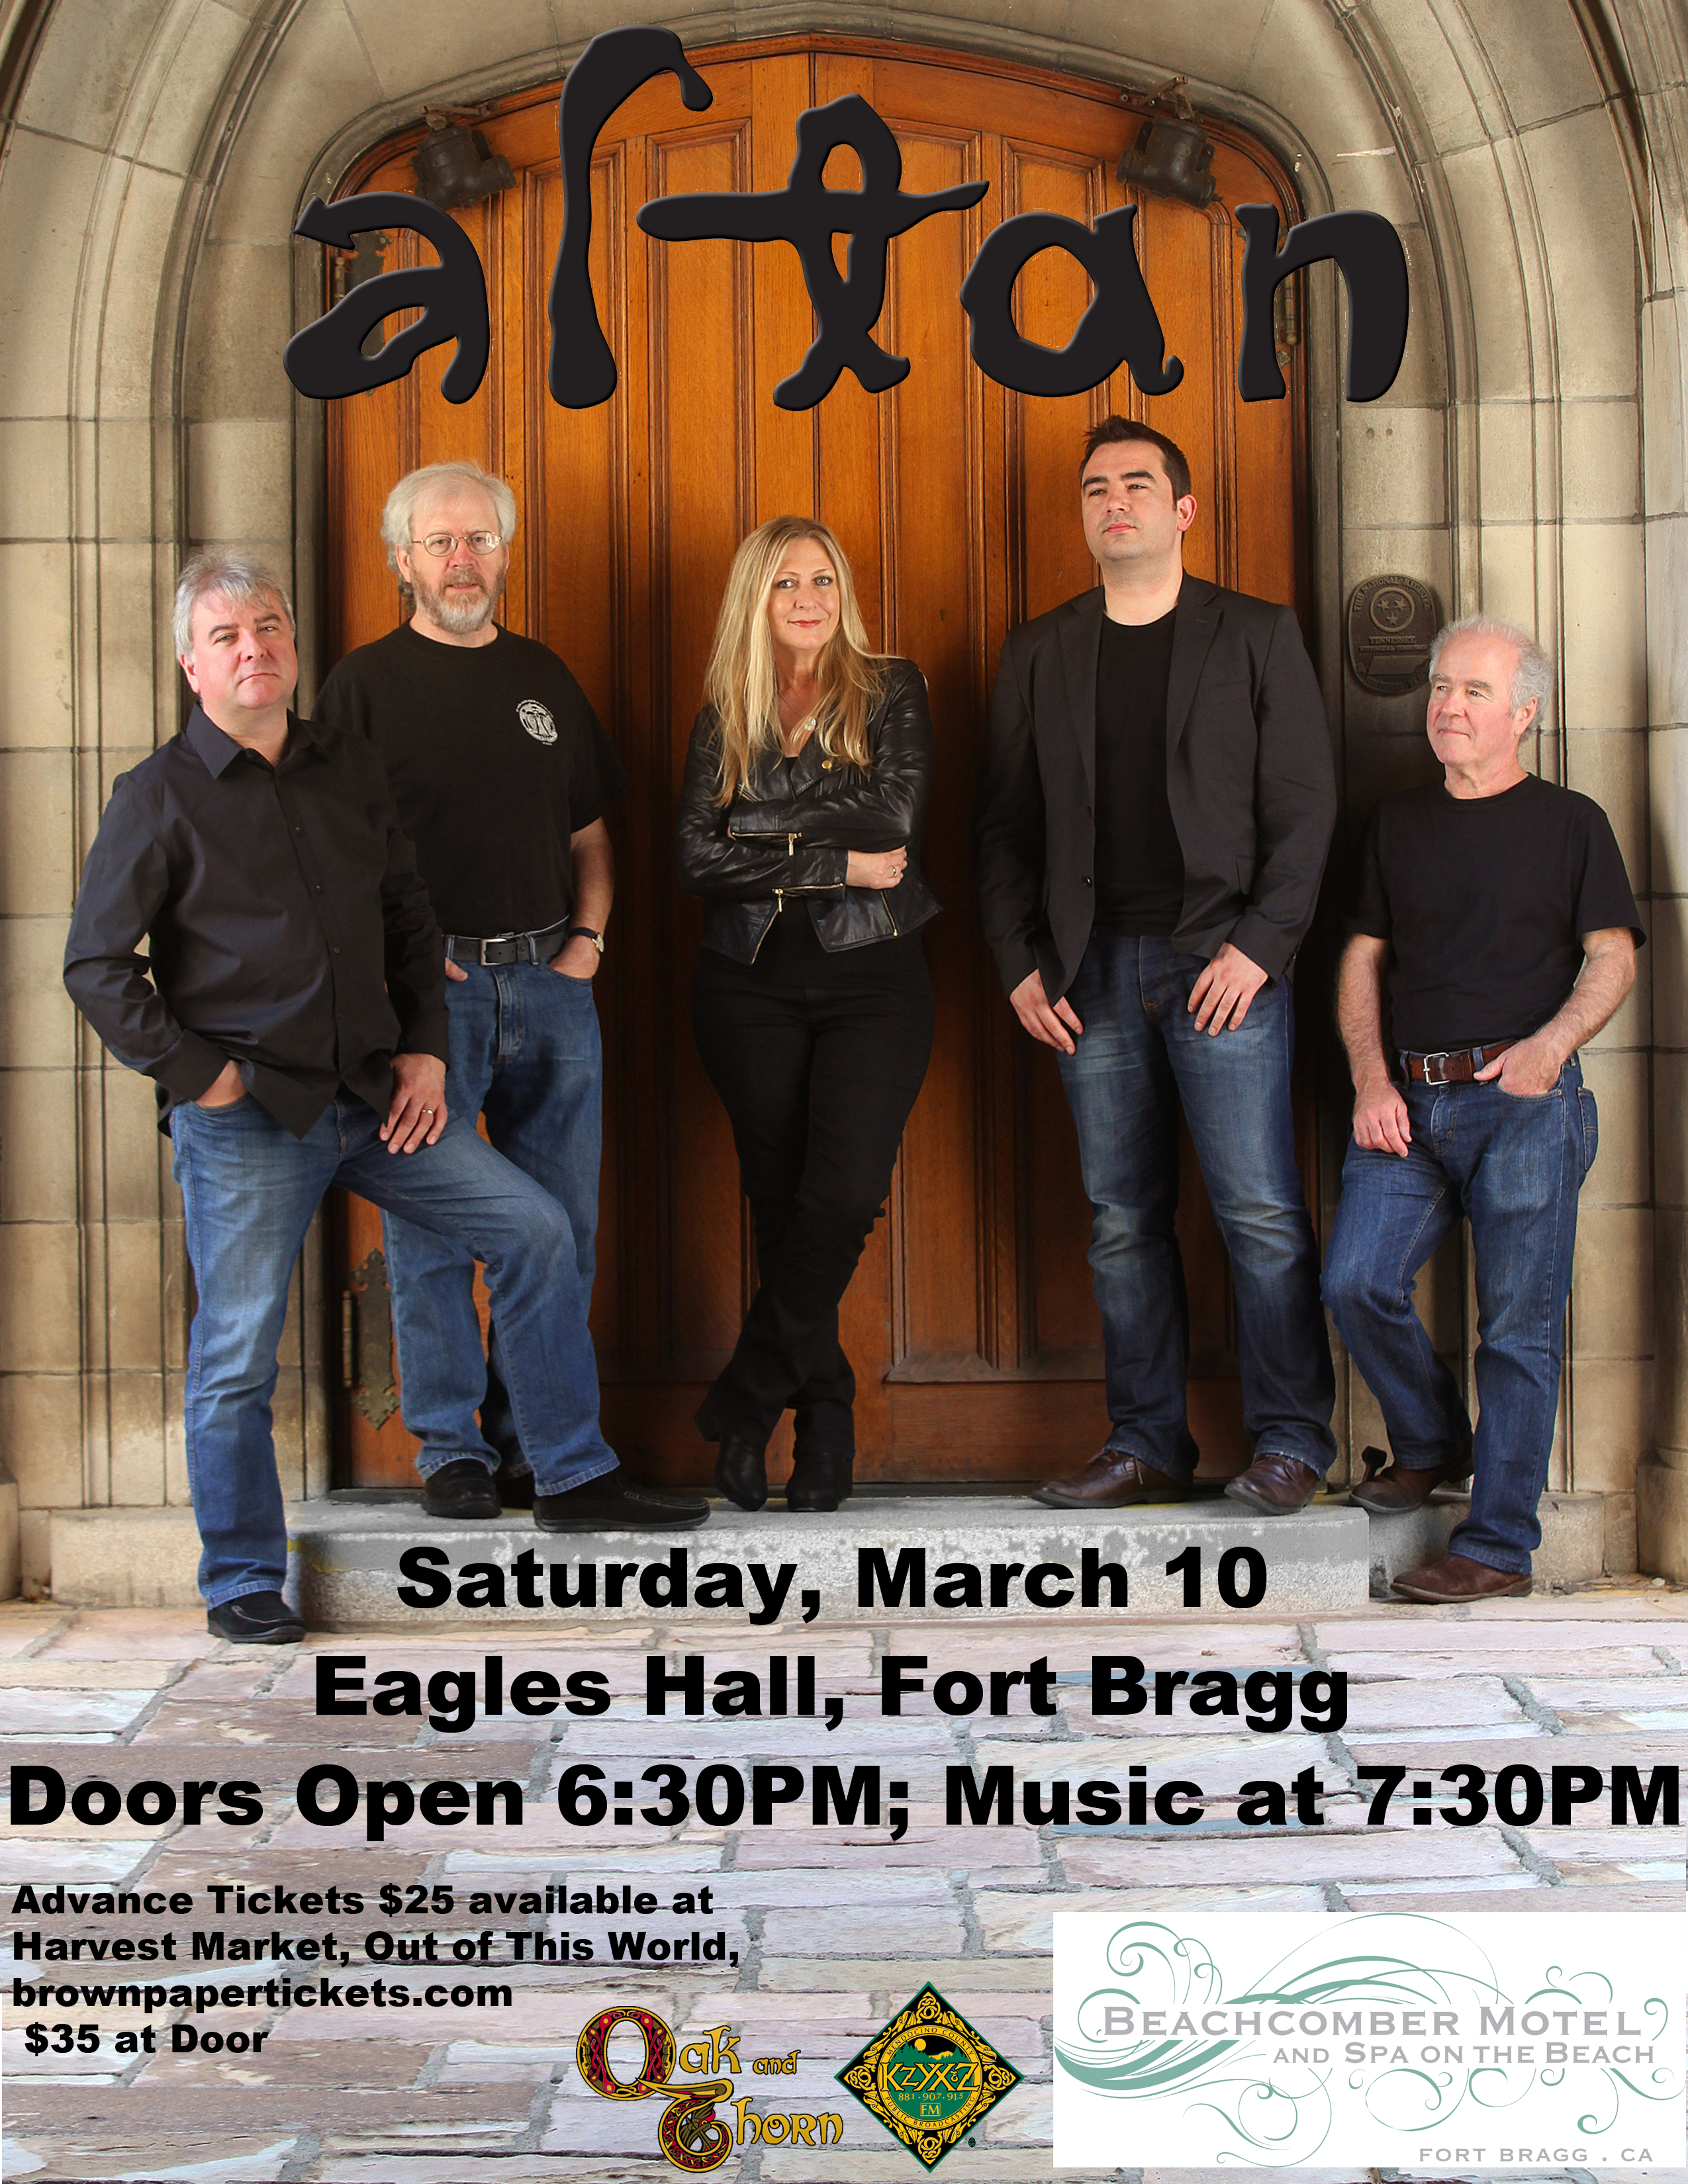 Altan will play a benefit concert for KZYX on Saturday, March 10th at Eagles Hall in Fort Bragg, CA.